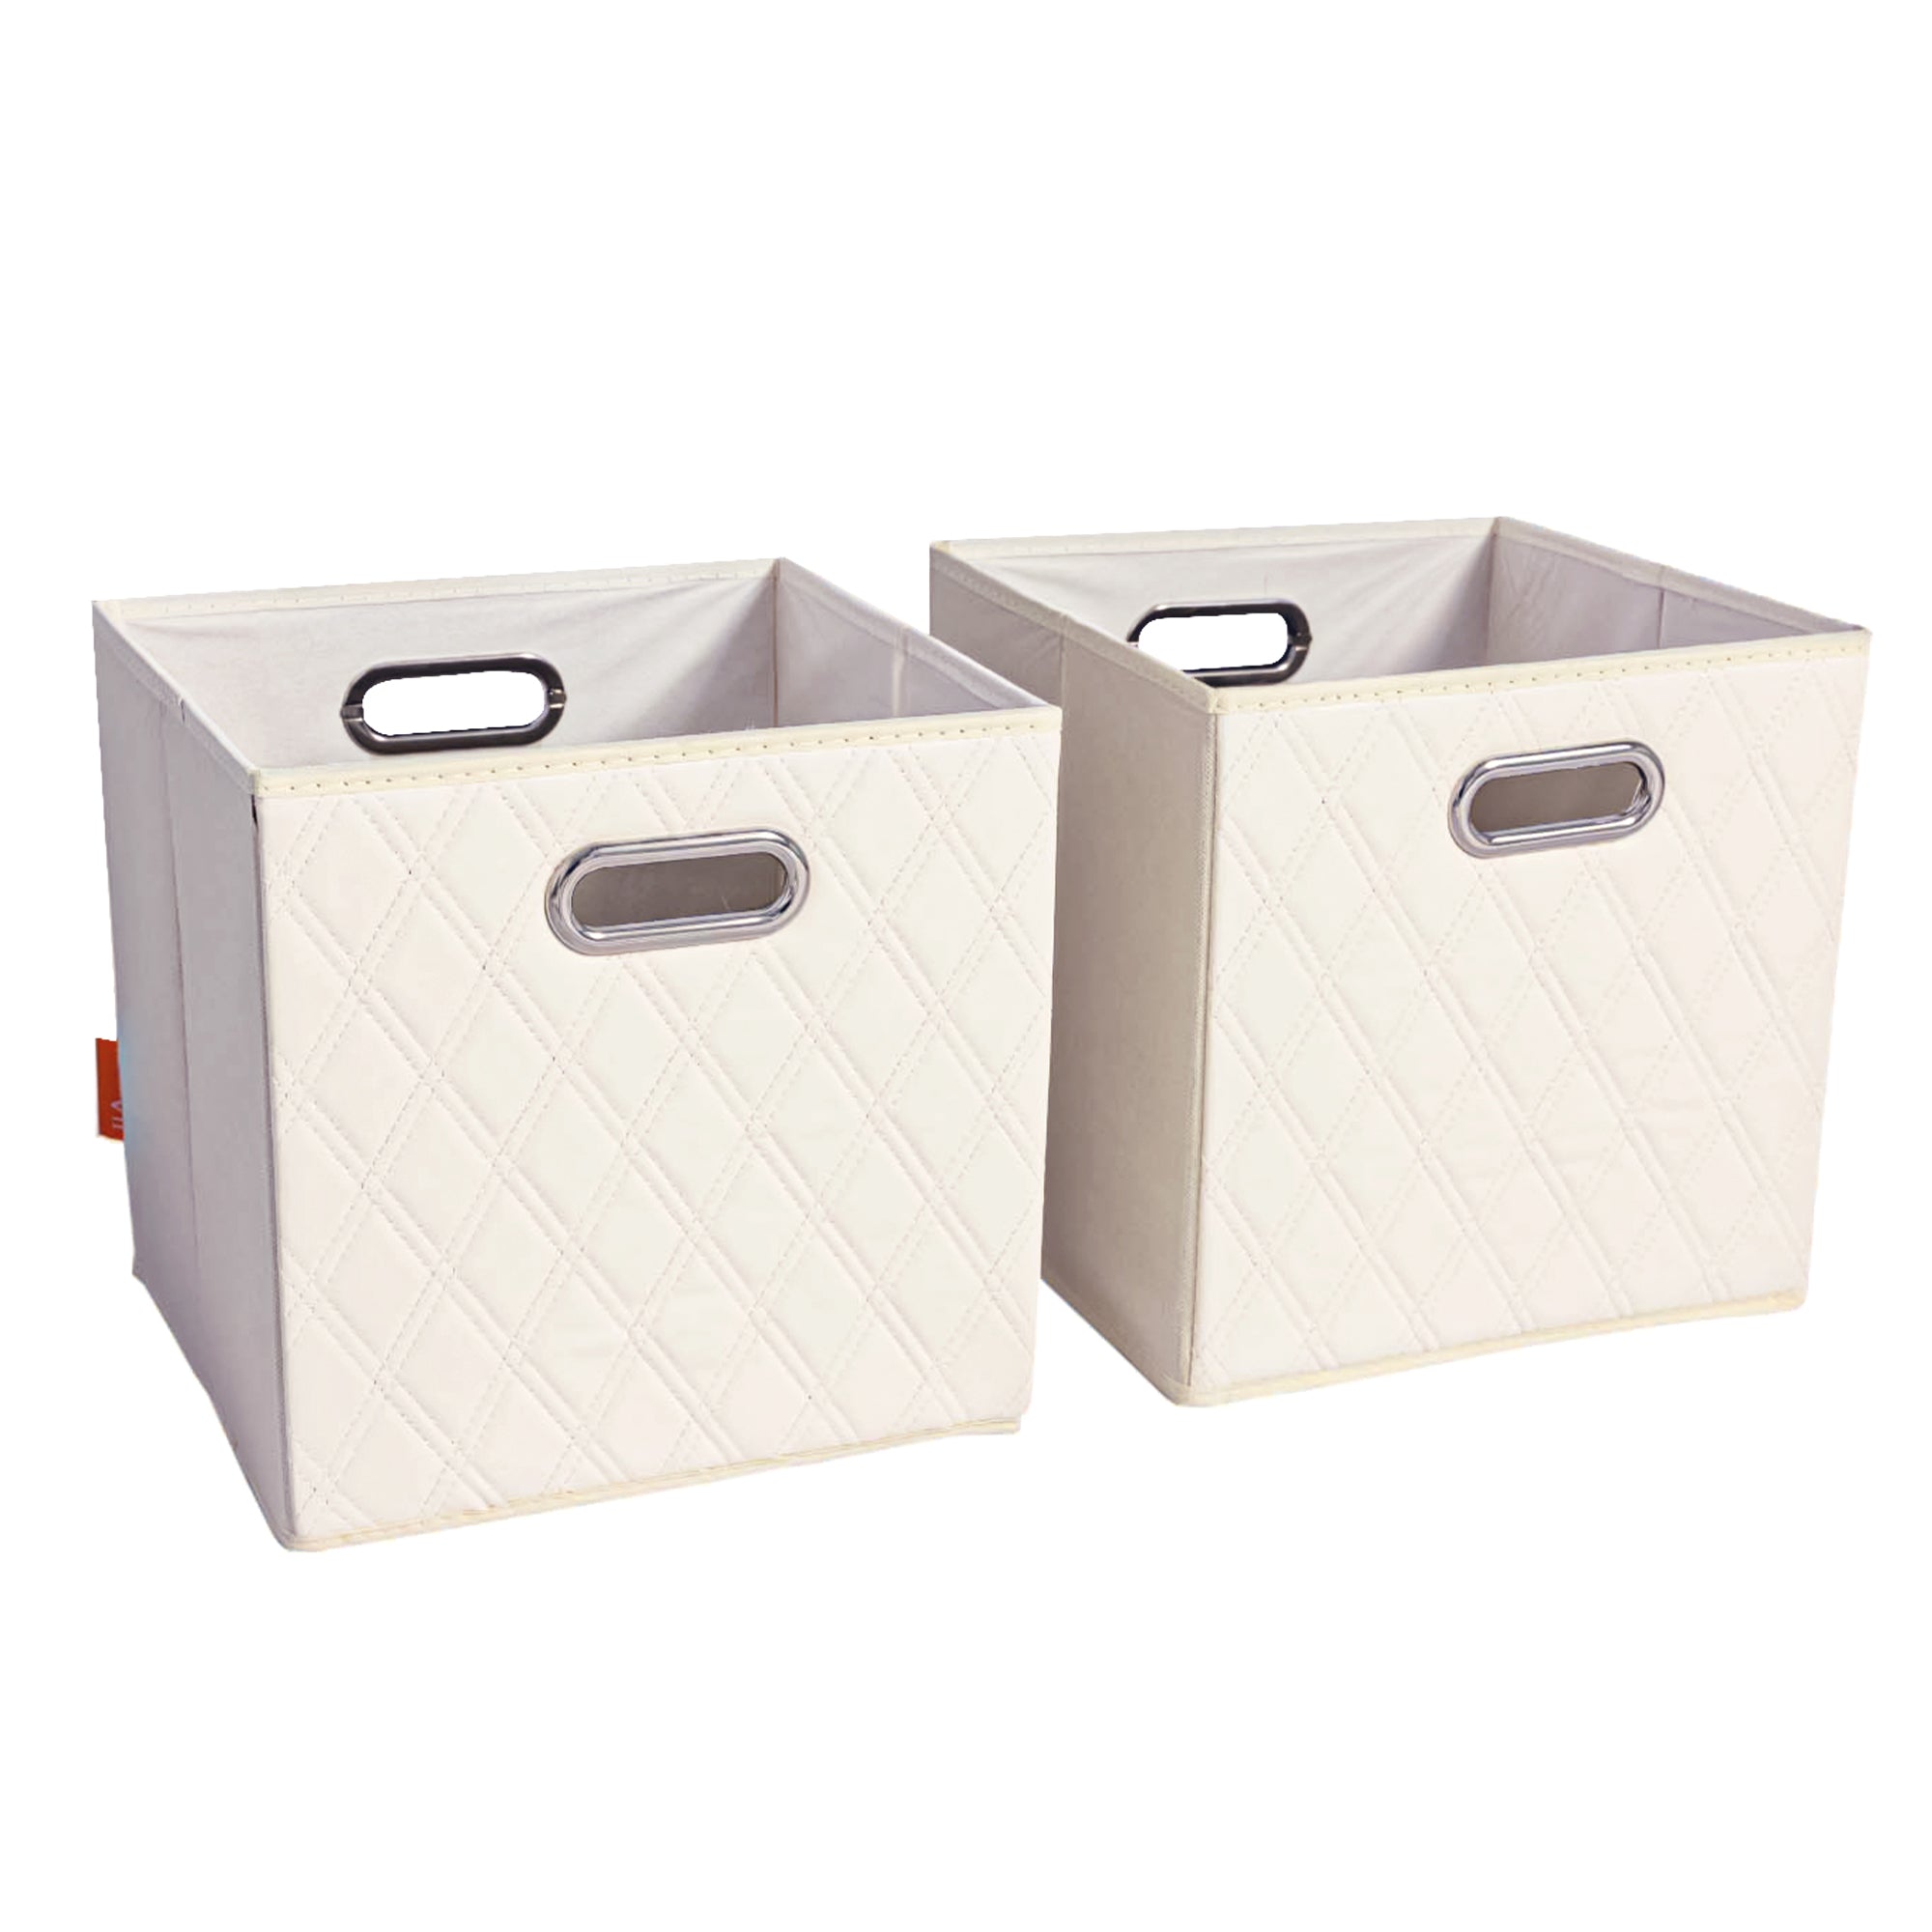 JIAessentials 11 inch Foldable Diamond Patterned Faux Leather Storage Cube Bins Set of Two with Dual Handles - 11" Beige